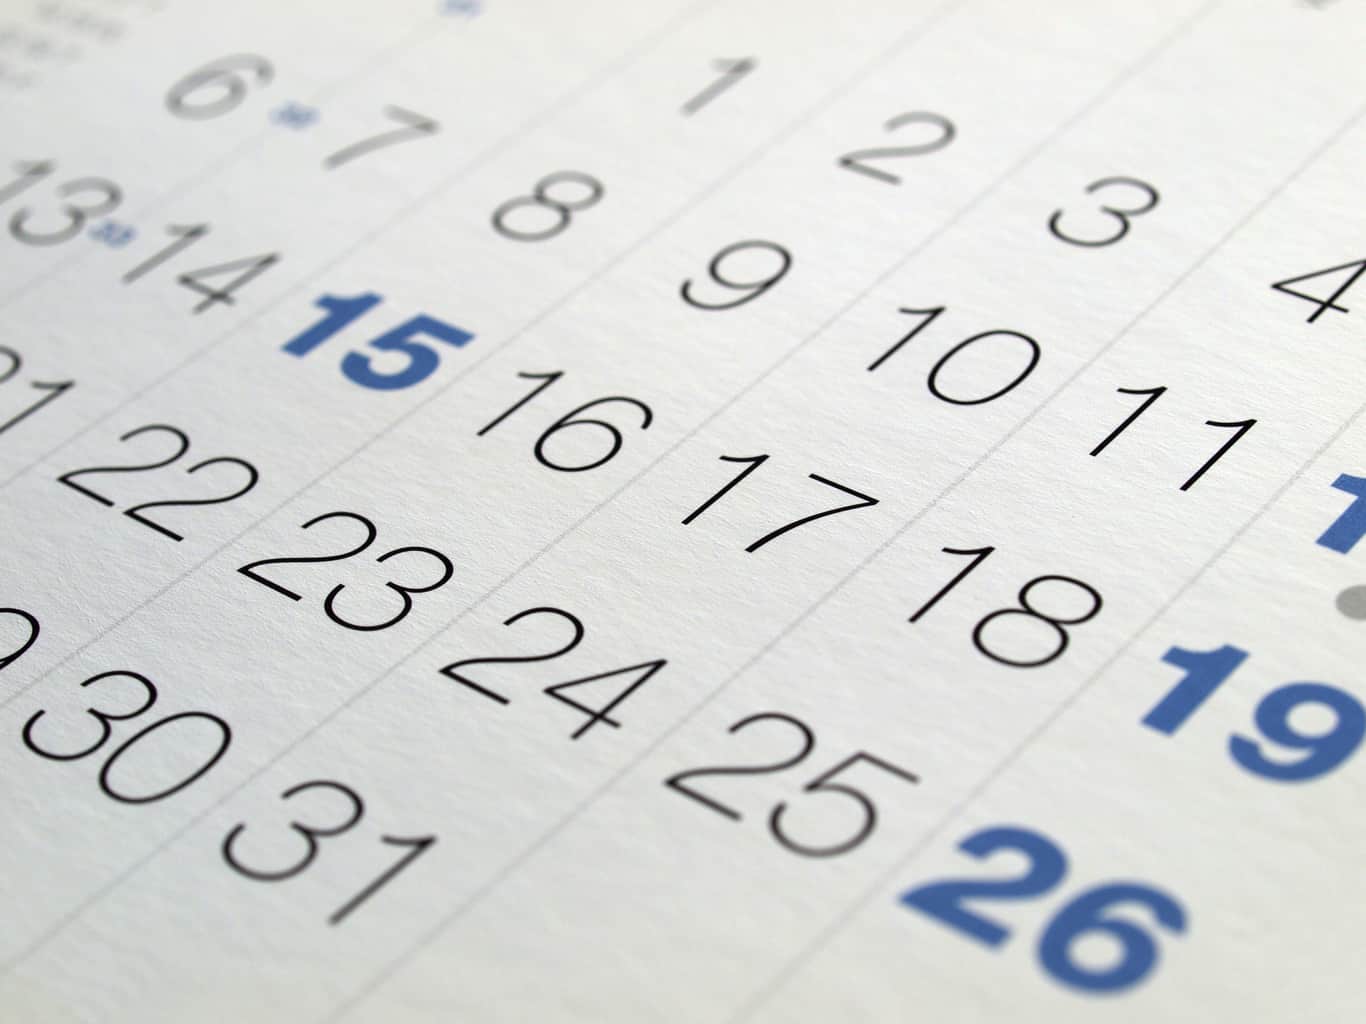 ACT Test Dates and Registration Deadlines • Love the SAT Test Prep